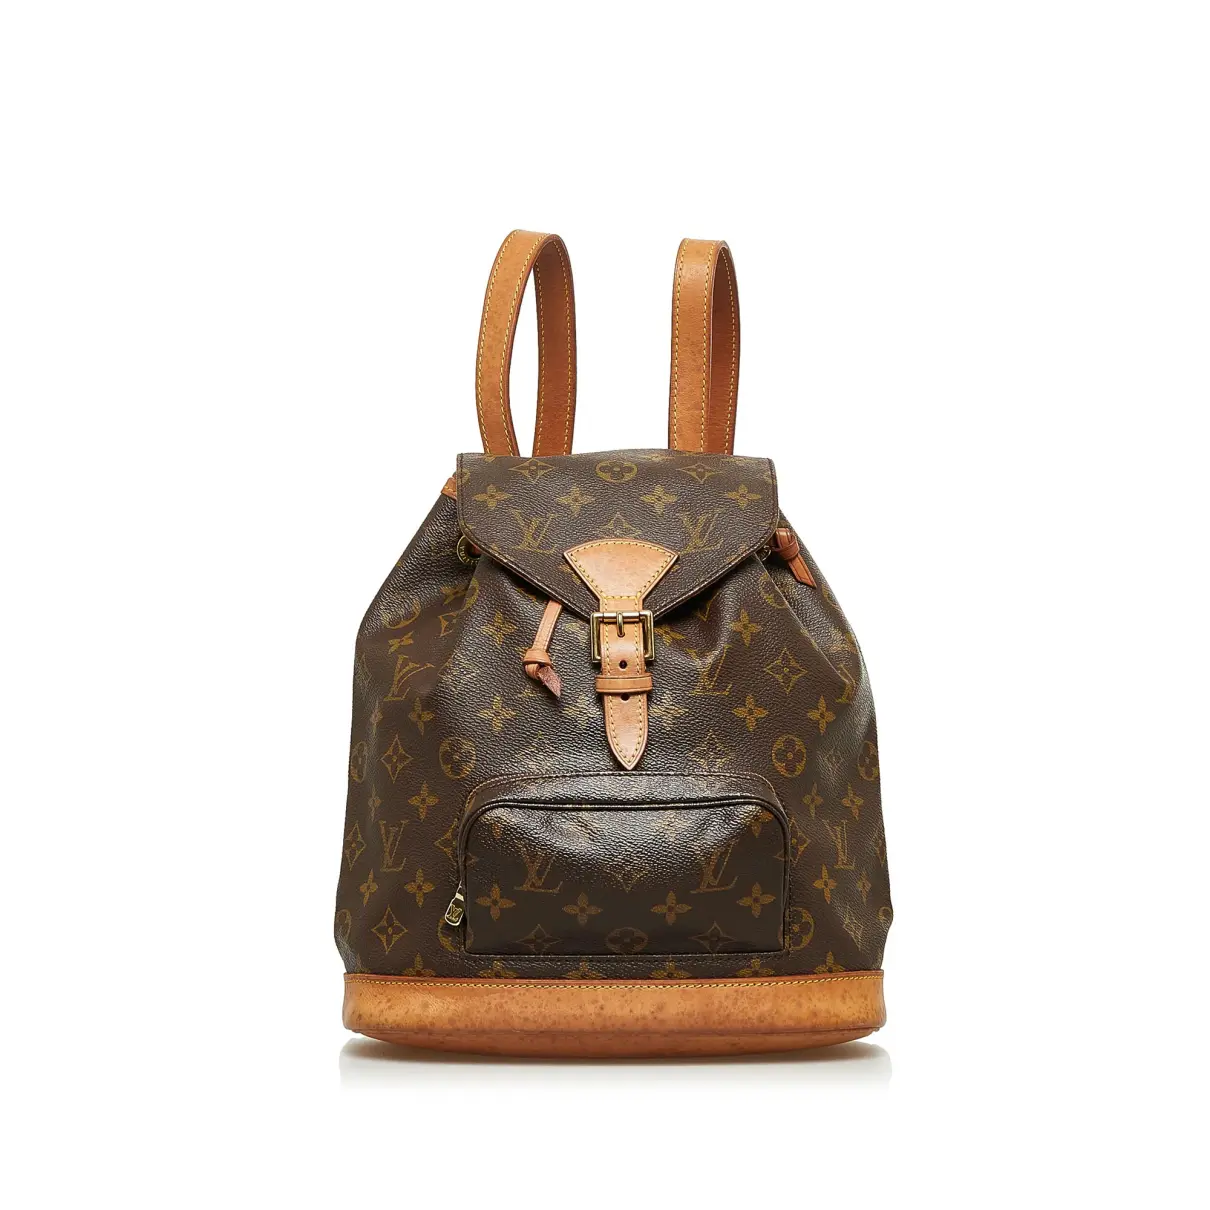 Montsouris cloth backpack